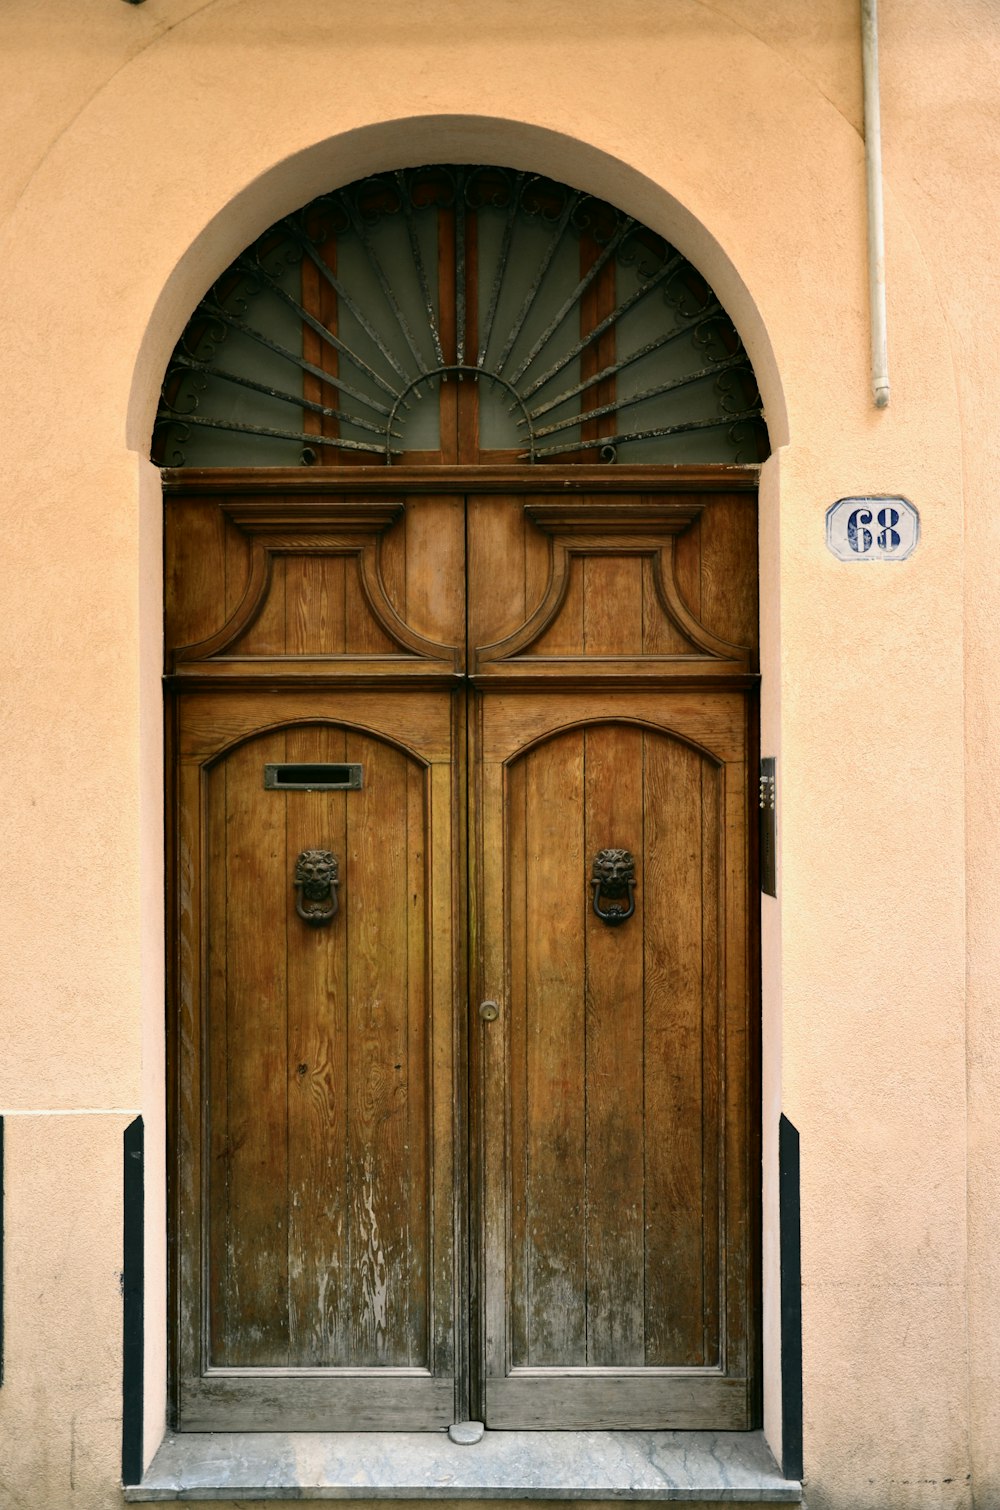 a large wooden door with a clock on the side of it